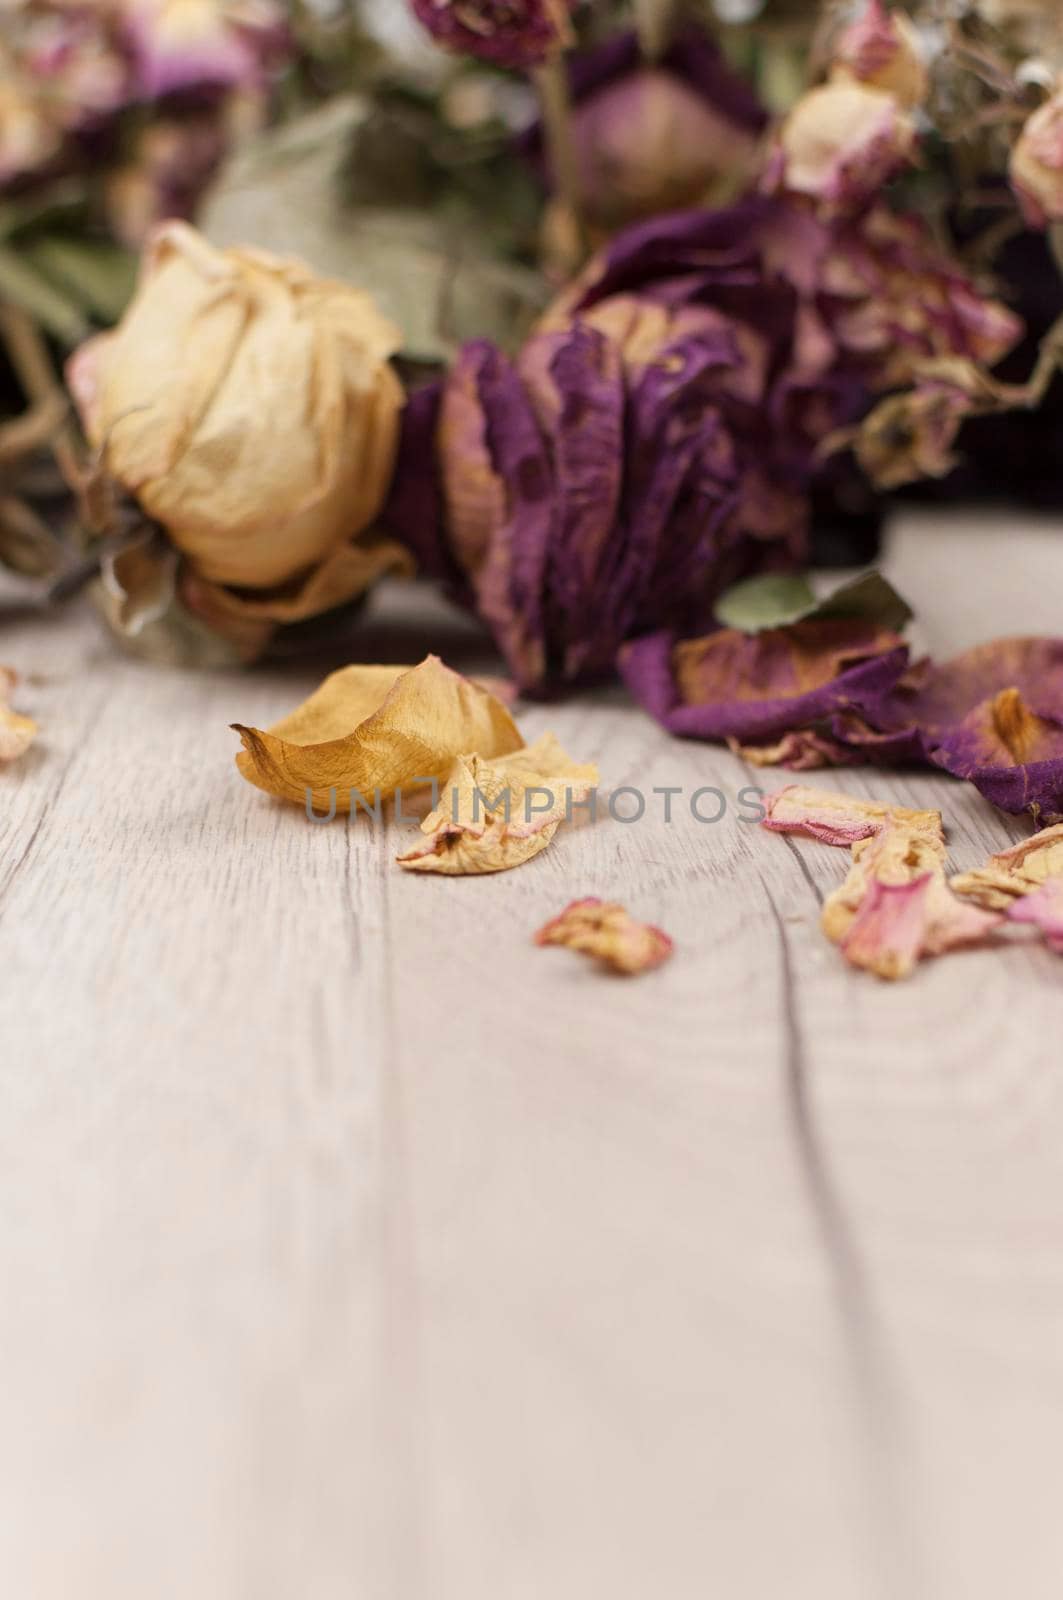 bouquet dried roses on old wood background with copy space by inxti